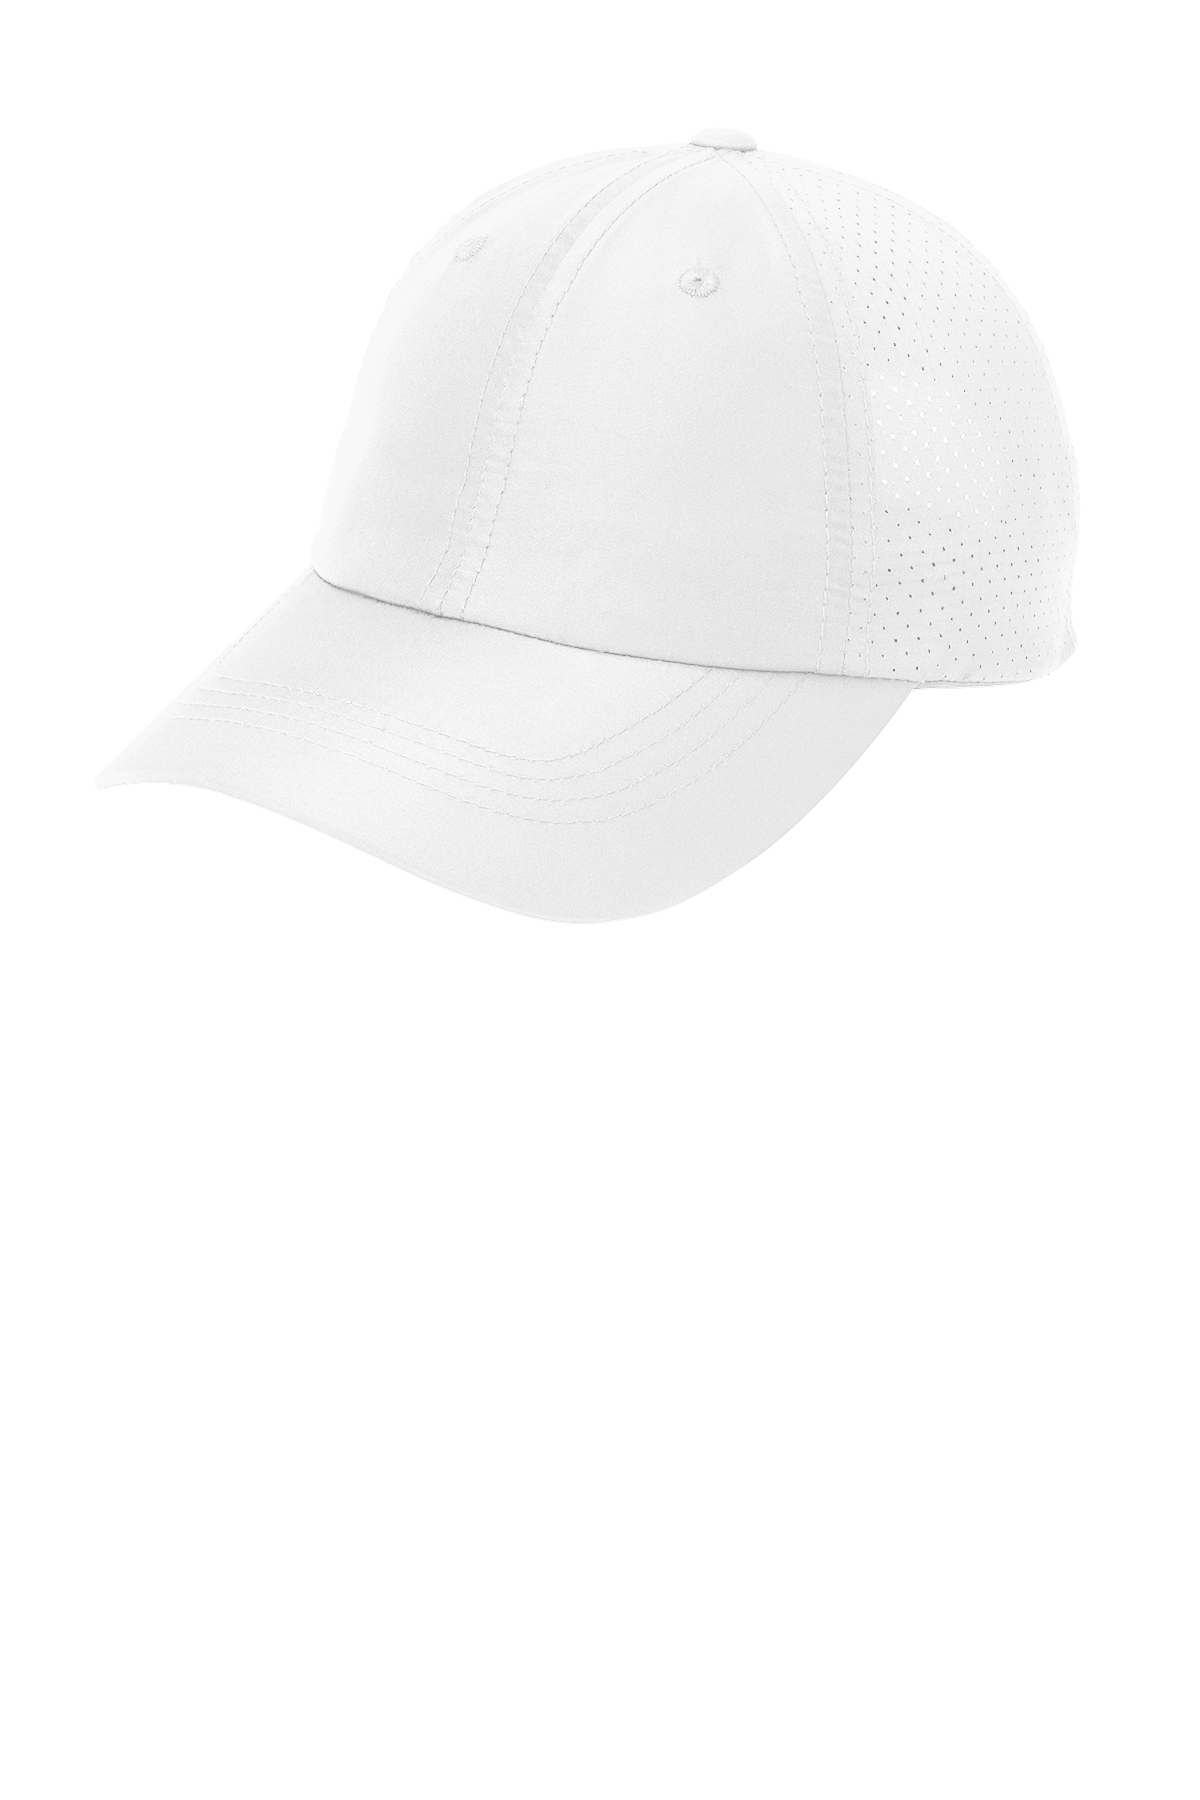 Port Authority Perforated Cap | Product | Port Authority